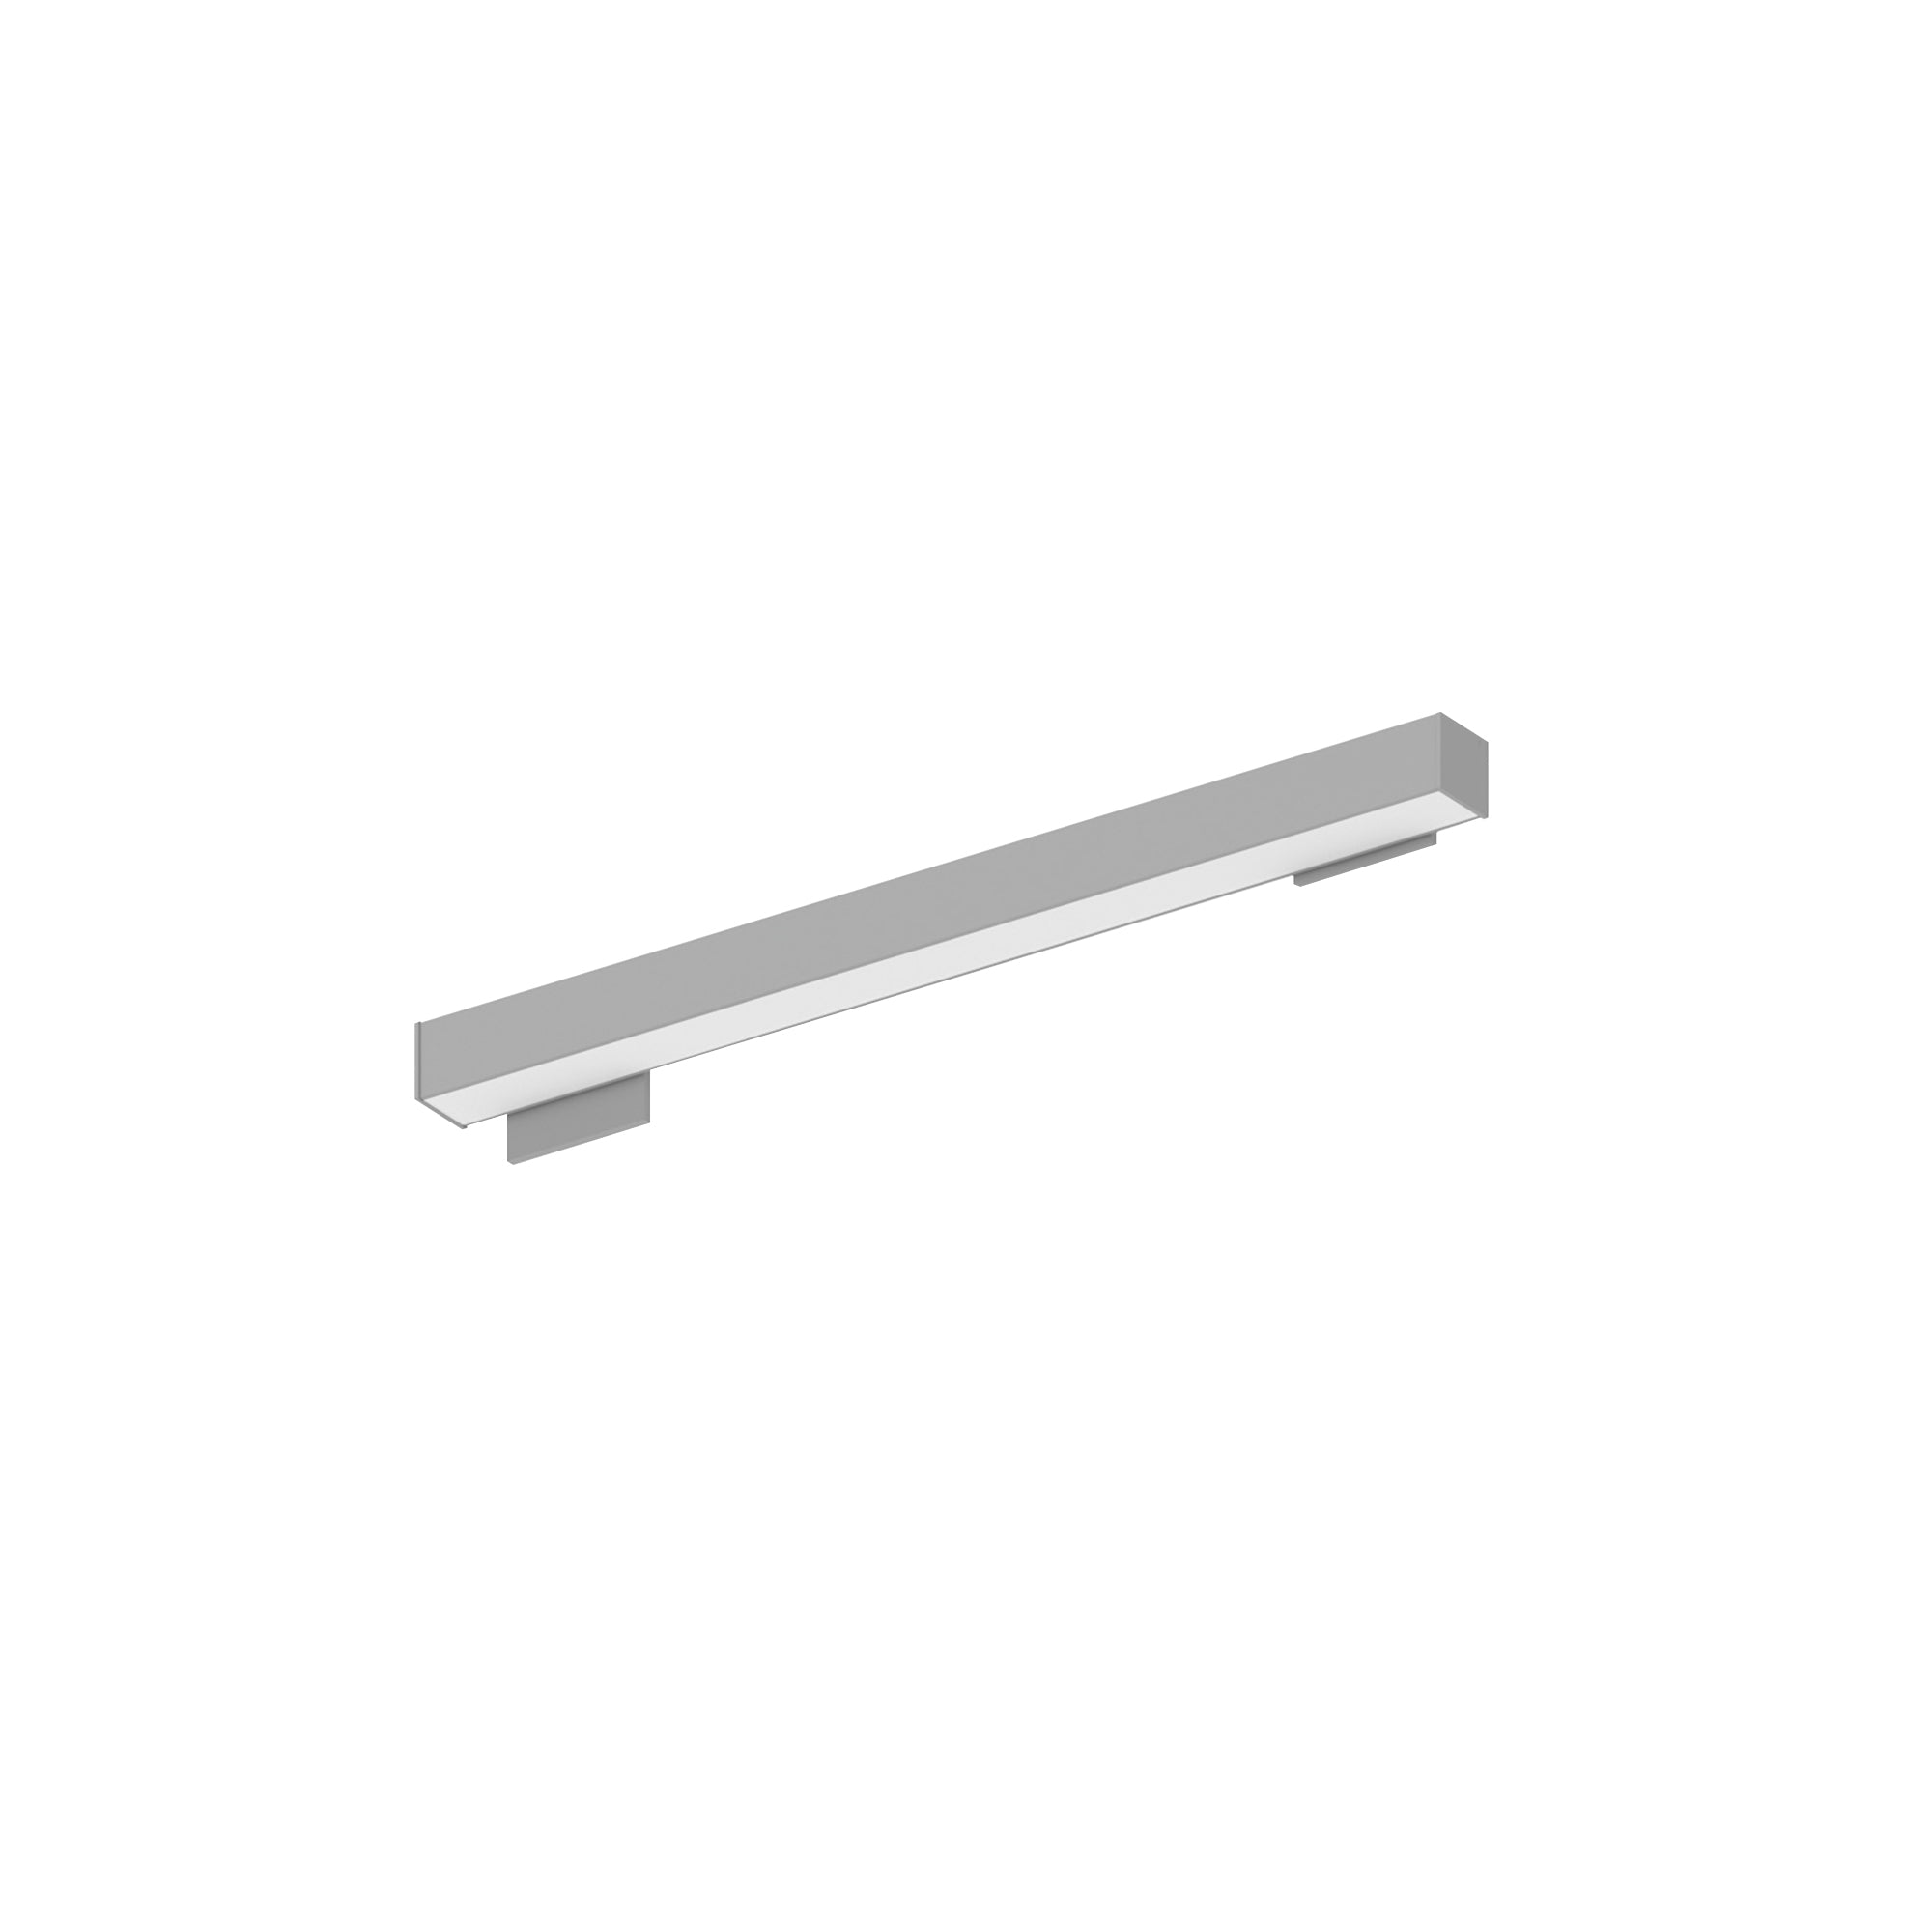 Nora Lighting NWLIN-21030A/L4P-R2 - Linear - 2' L-Line LED Wall Mount Linear, 2100lm / 3000K, 4 Inchx4 Inch Left Plate & 2 Inchx4 Inch Right Plate, Left Power Feed, Aluminum Finish